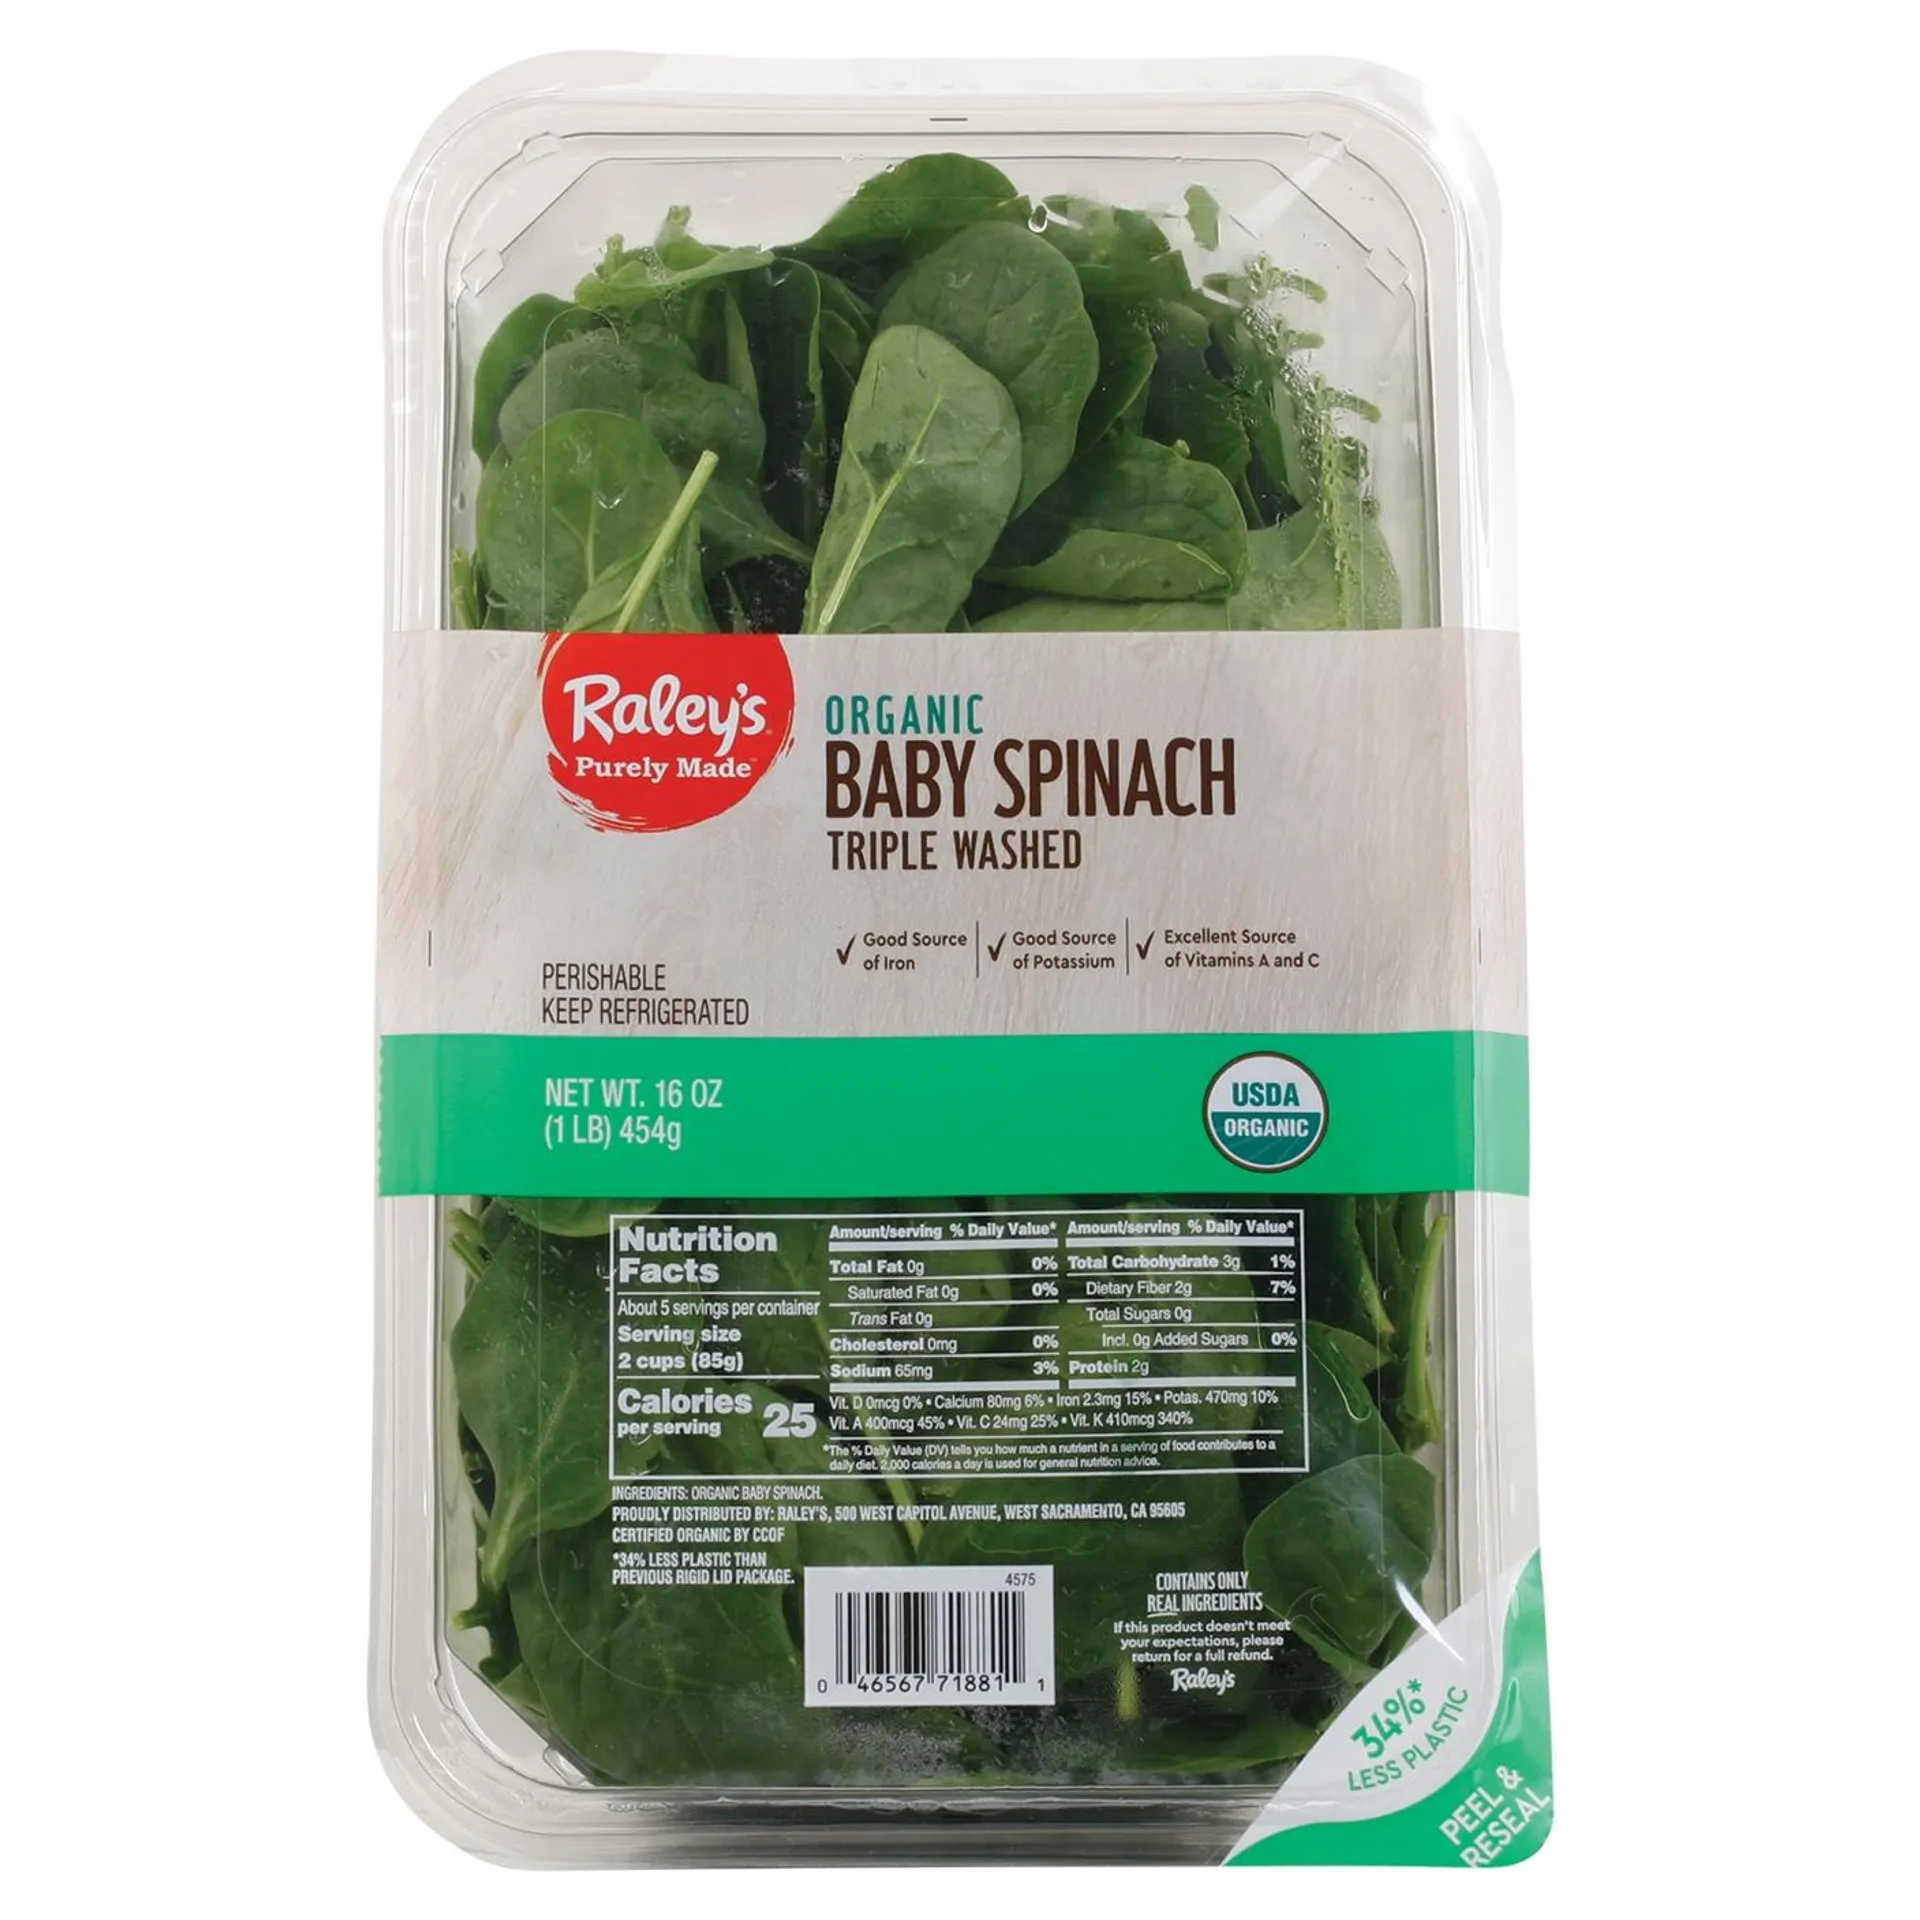 Raley's Spinach, Baby, Organic